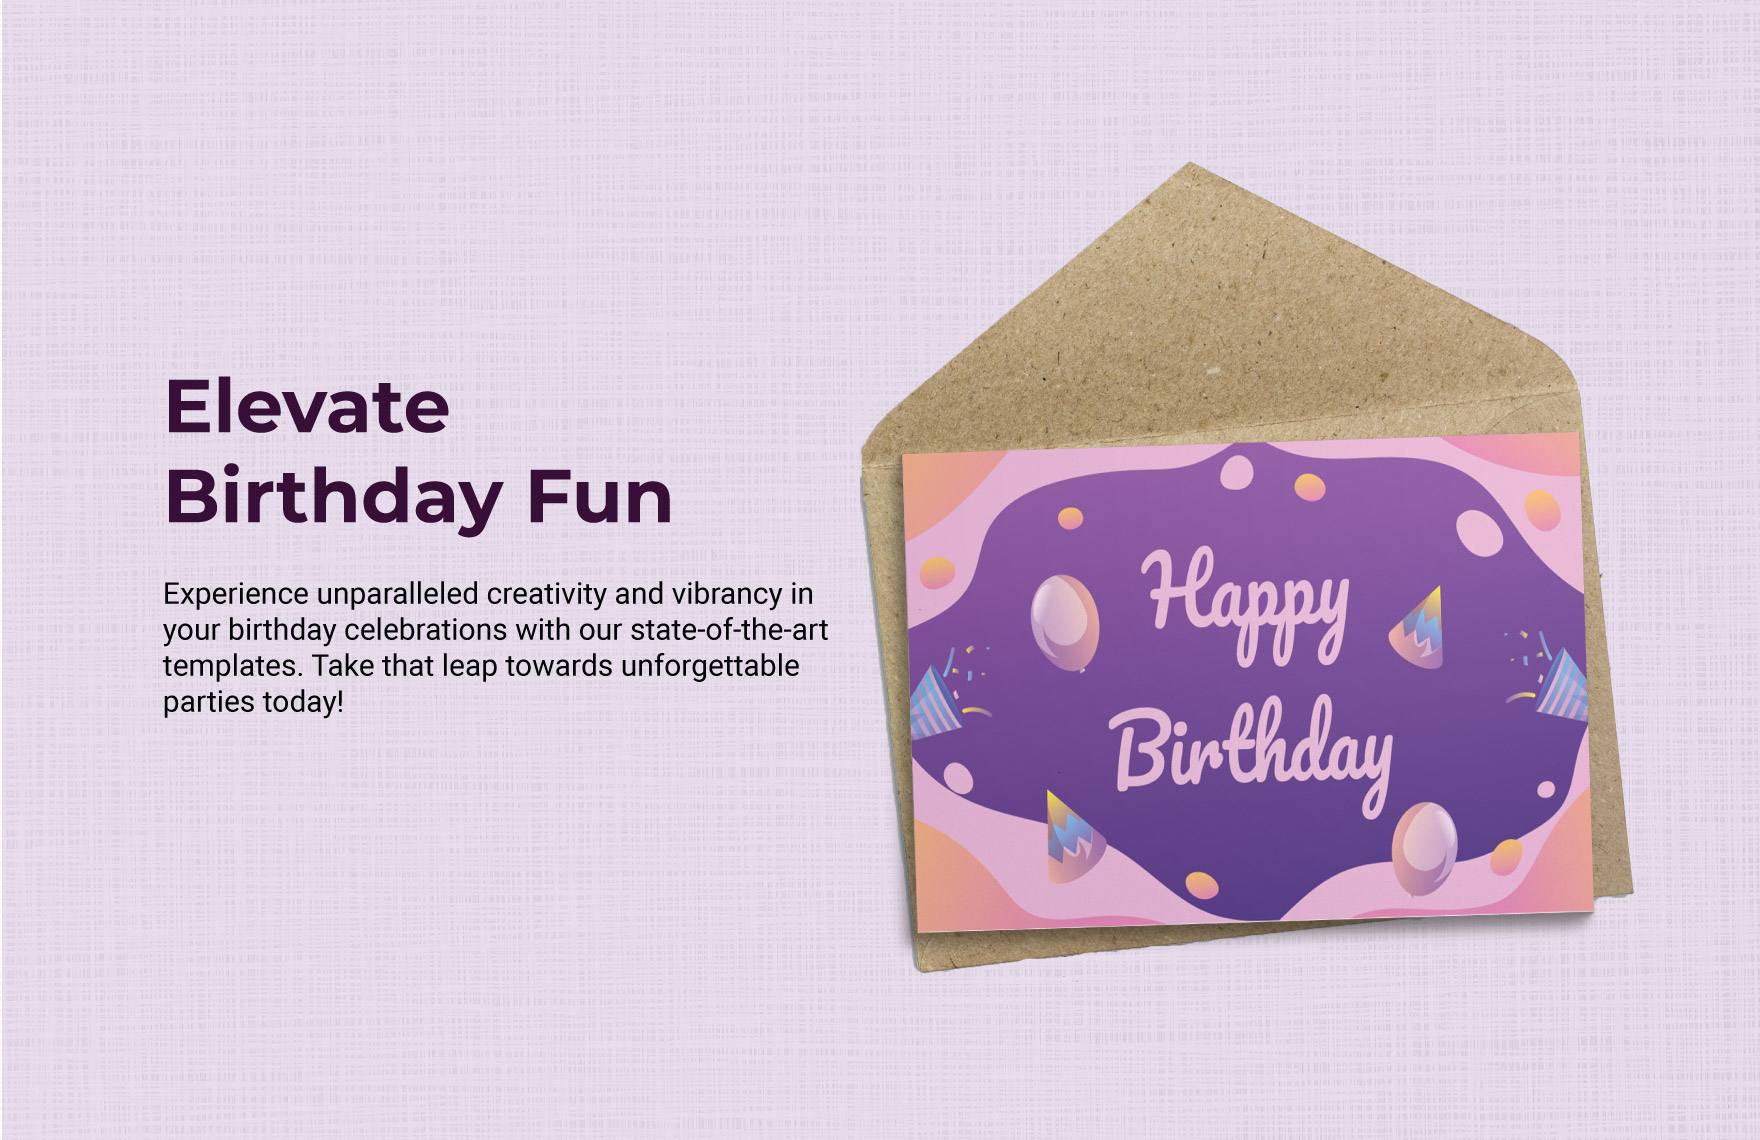 Happy Birthday Party Template